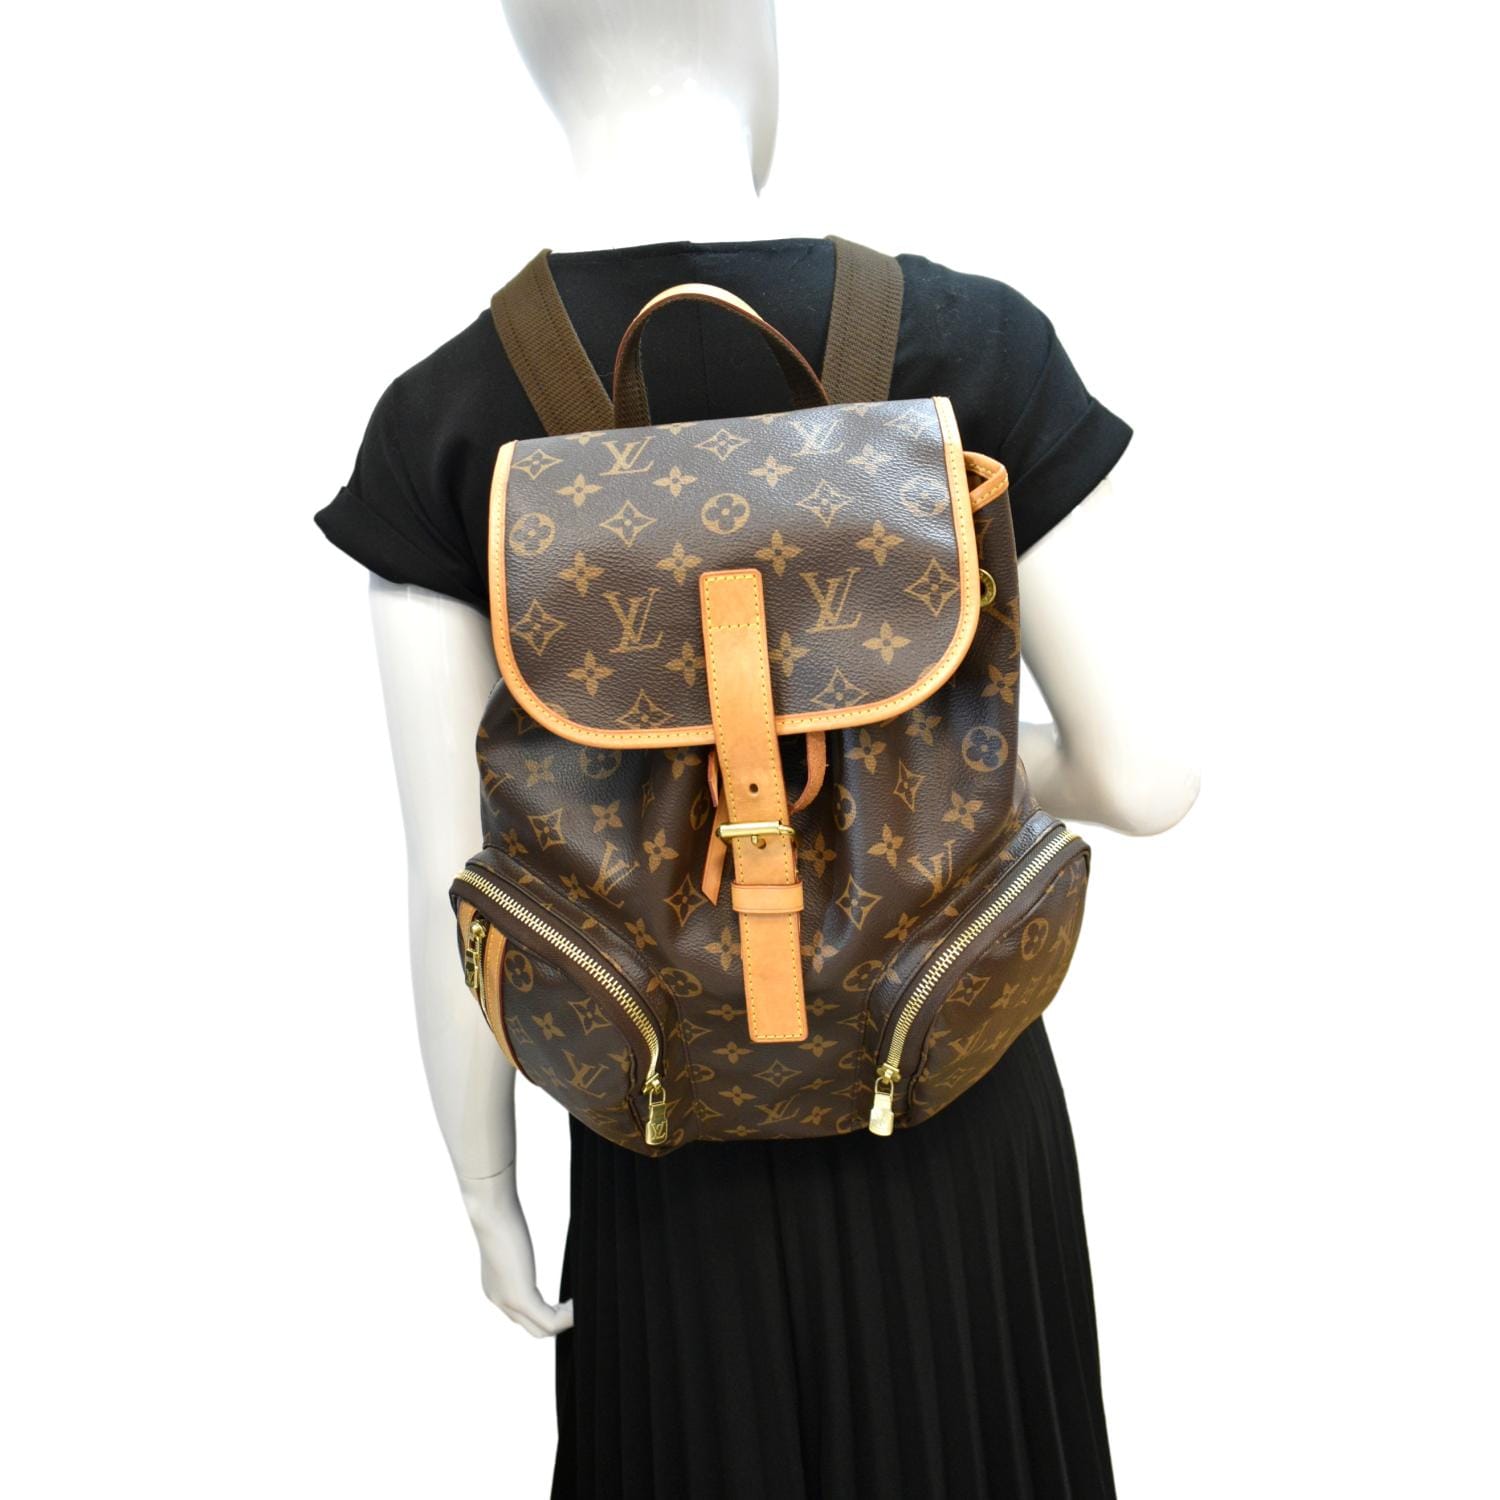 Bosphore backpack leather backpack Louis Vuitton Brown in Leather